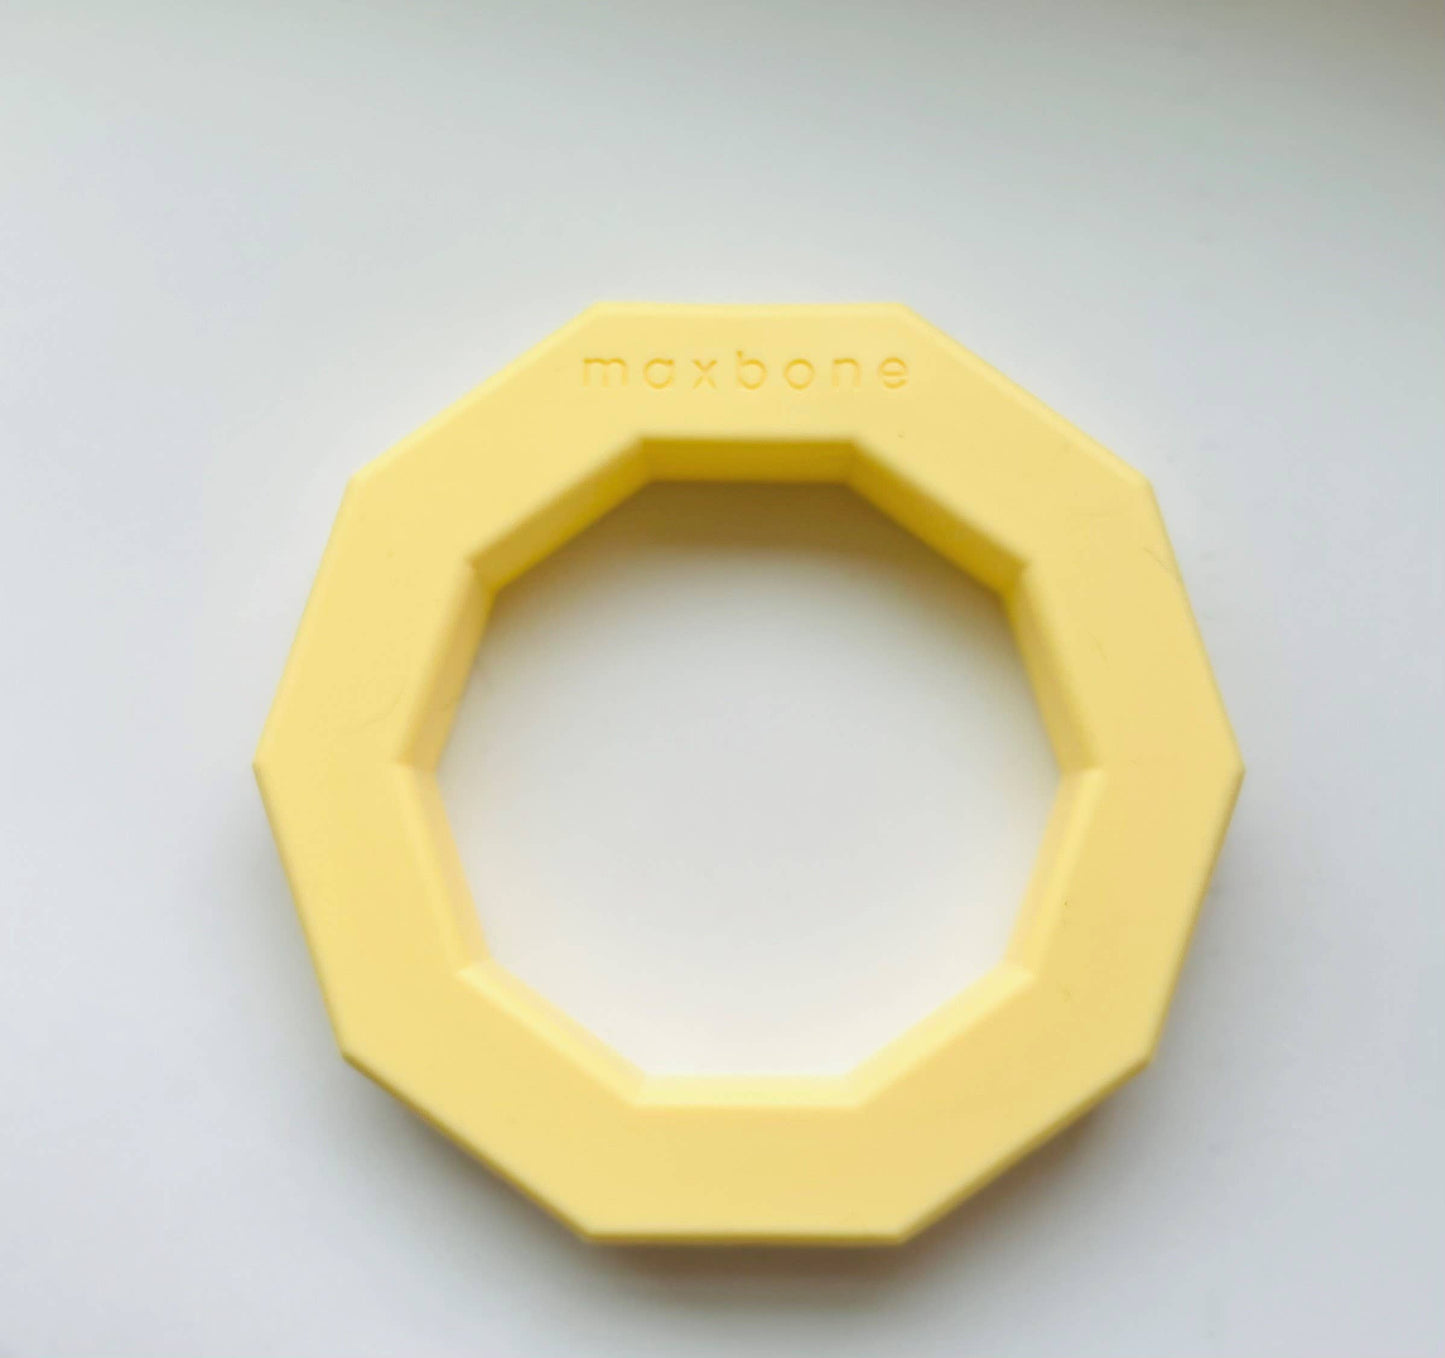 Decagon Rubber Dog Toy: Mint